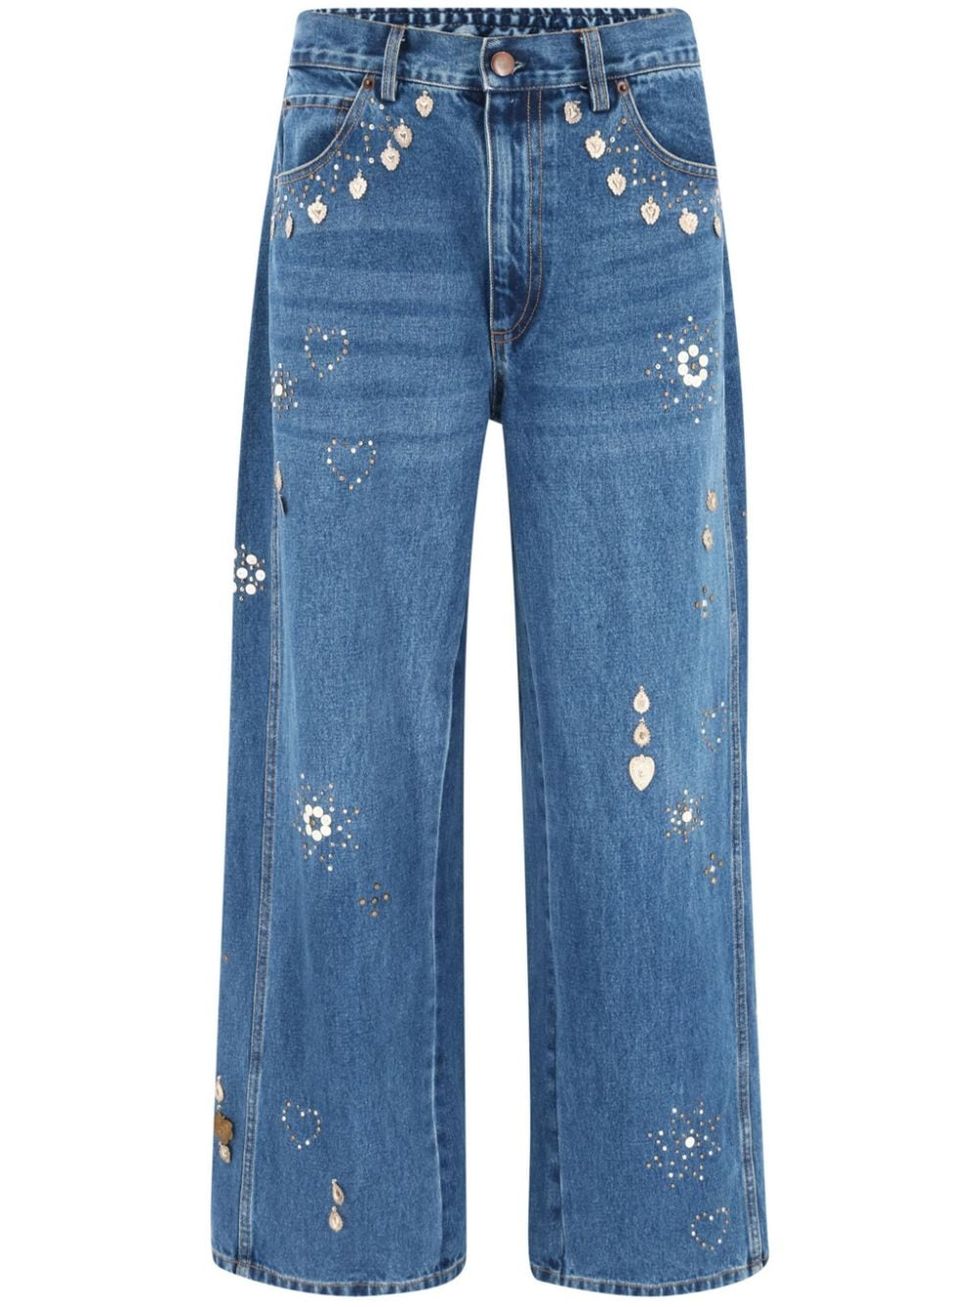 Embellished Jeans Are The Dramatic Denim Trend We Deserve Right Now